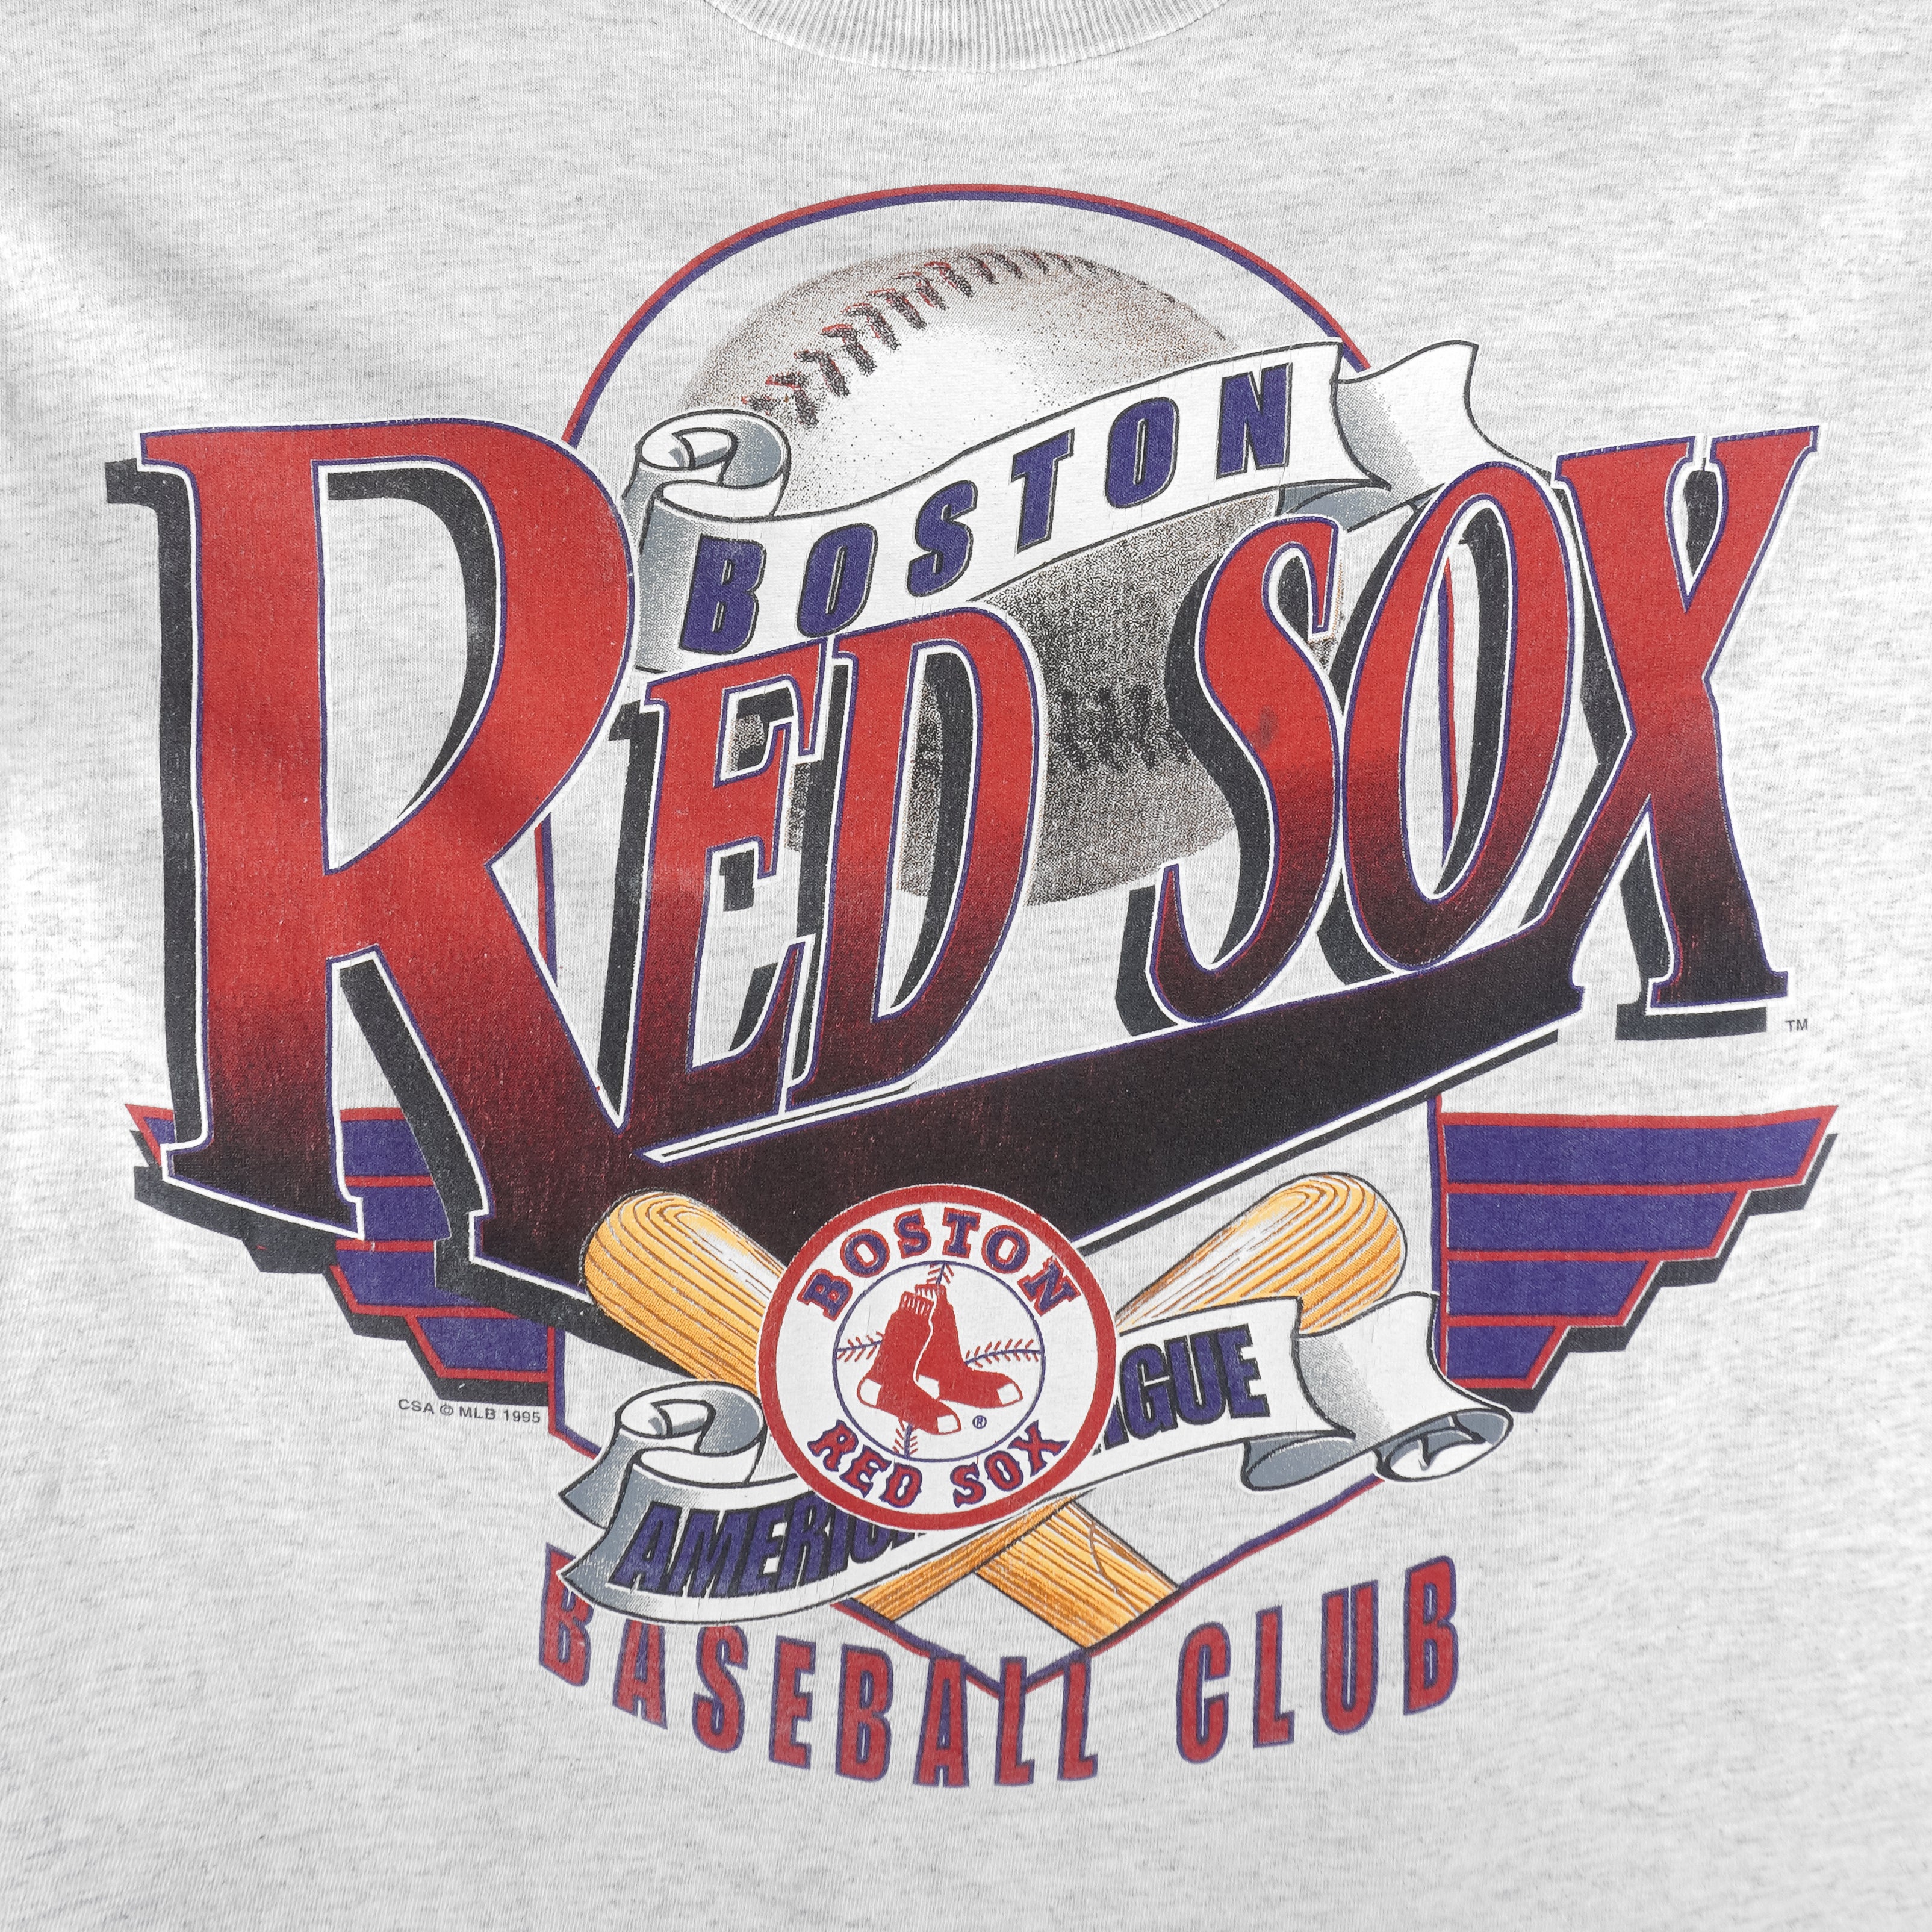 Boston Red Sox Tommy Bahama Island League T-Shirt, hoodie, sweater